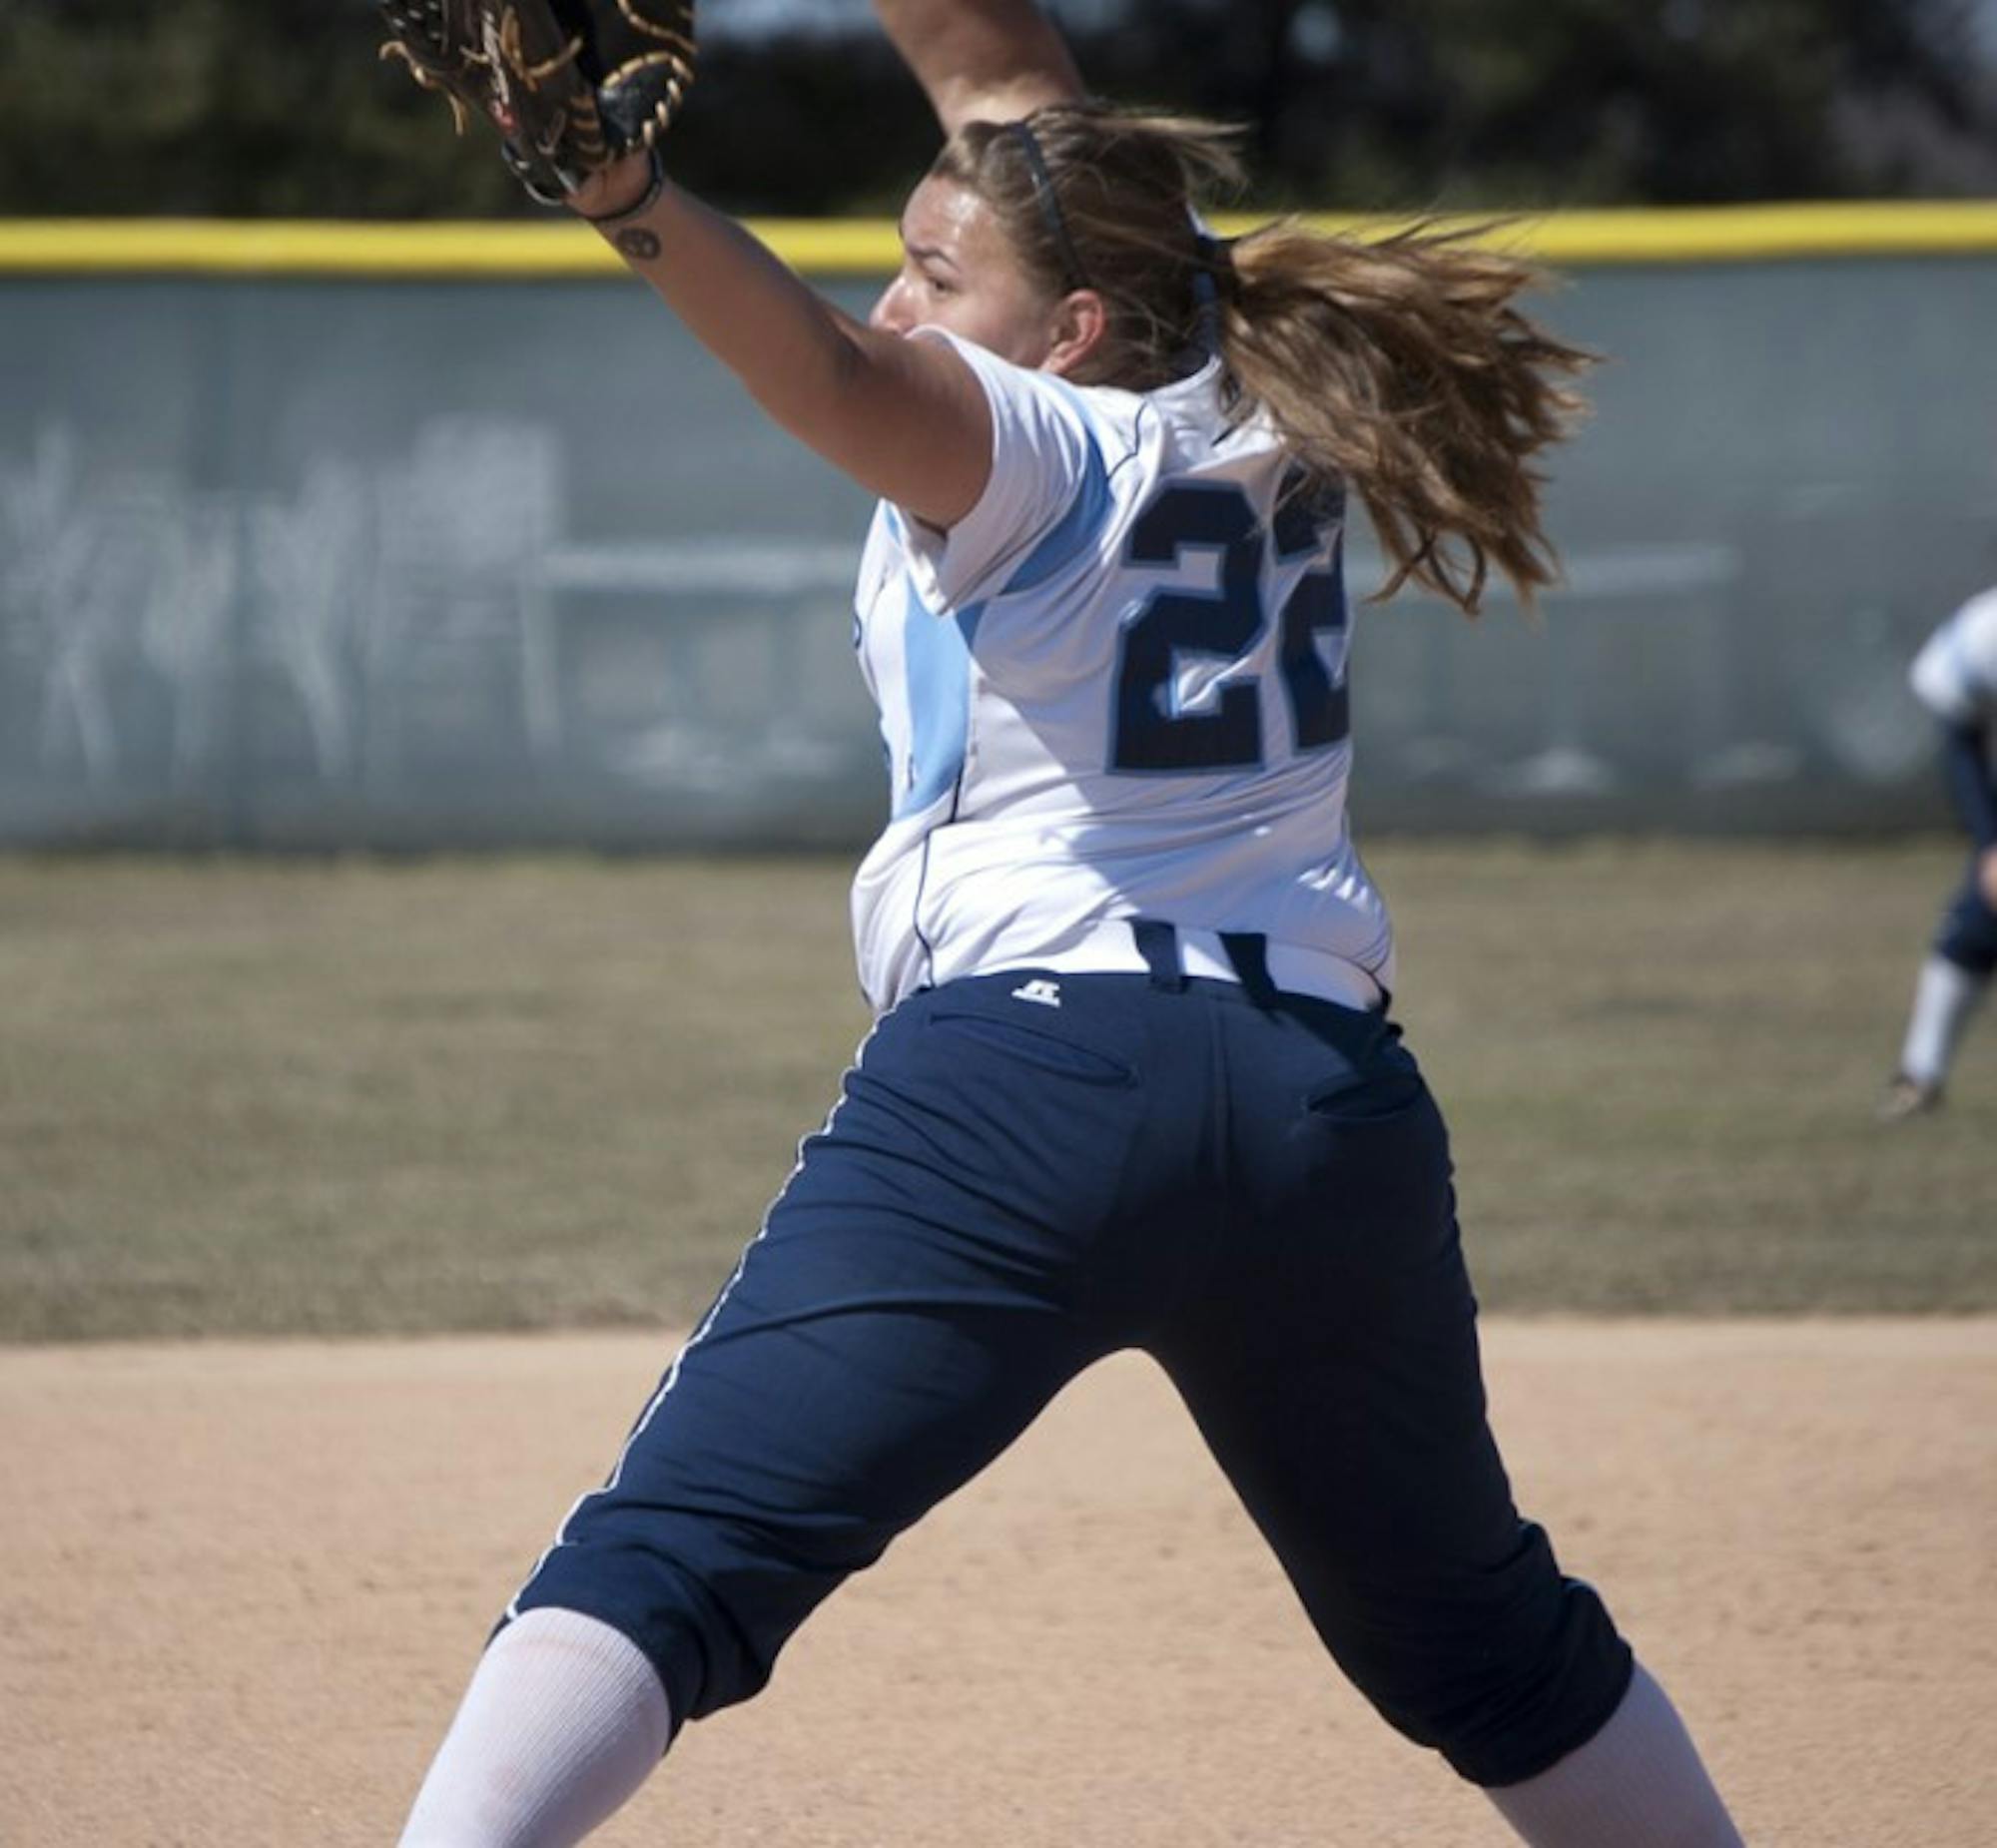 Senior pitcher Callie Selner delivers a pitch against Defiance on March 2. Selner has a 1.98 ERA so far this season.